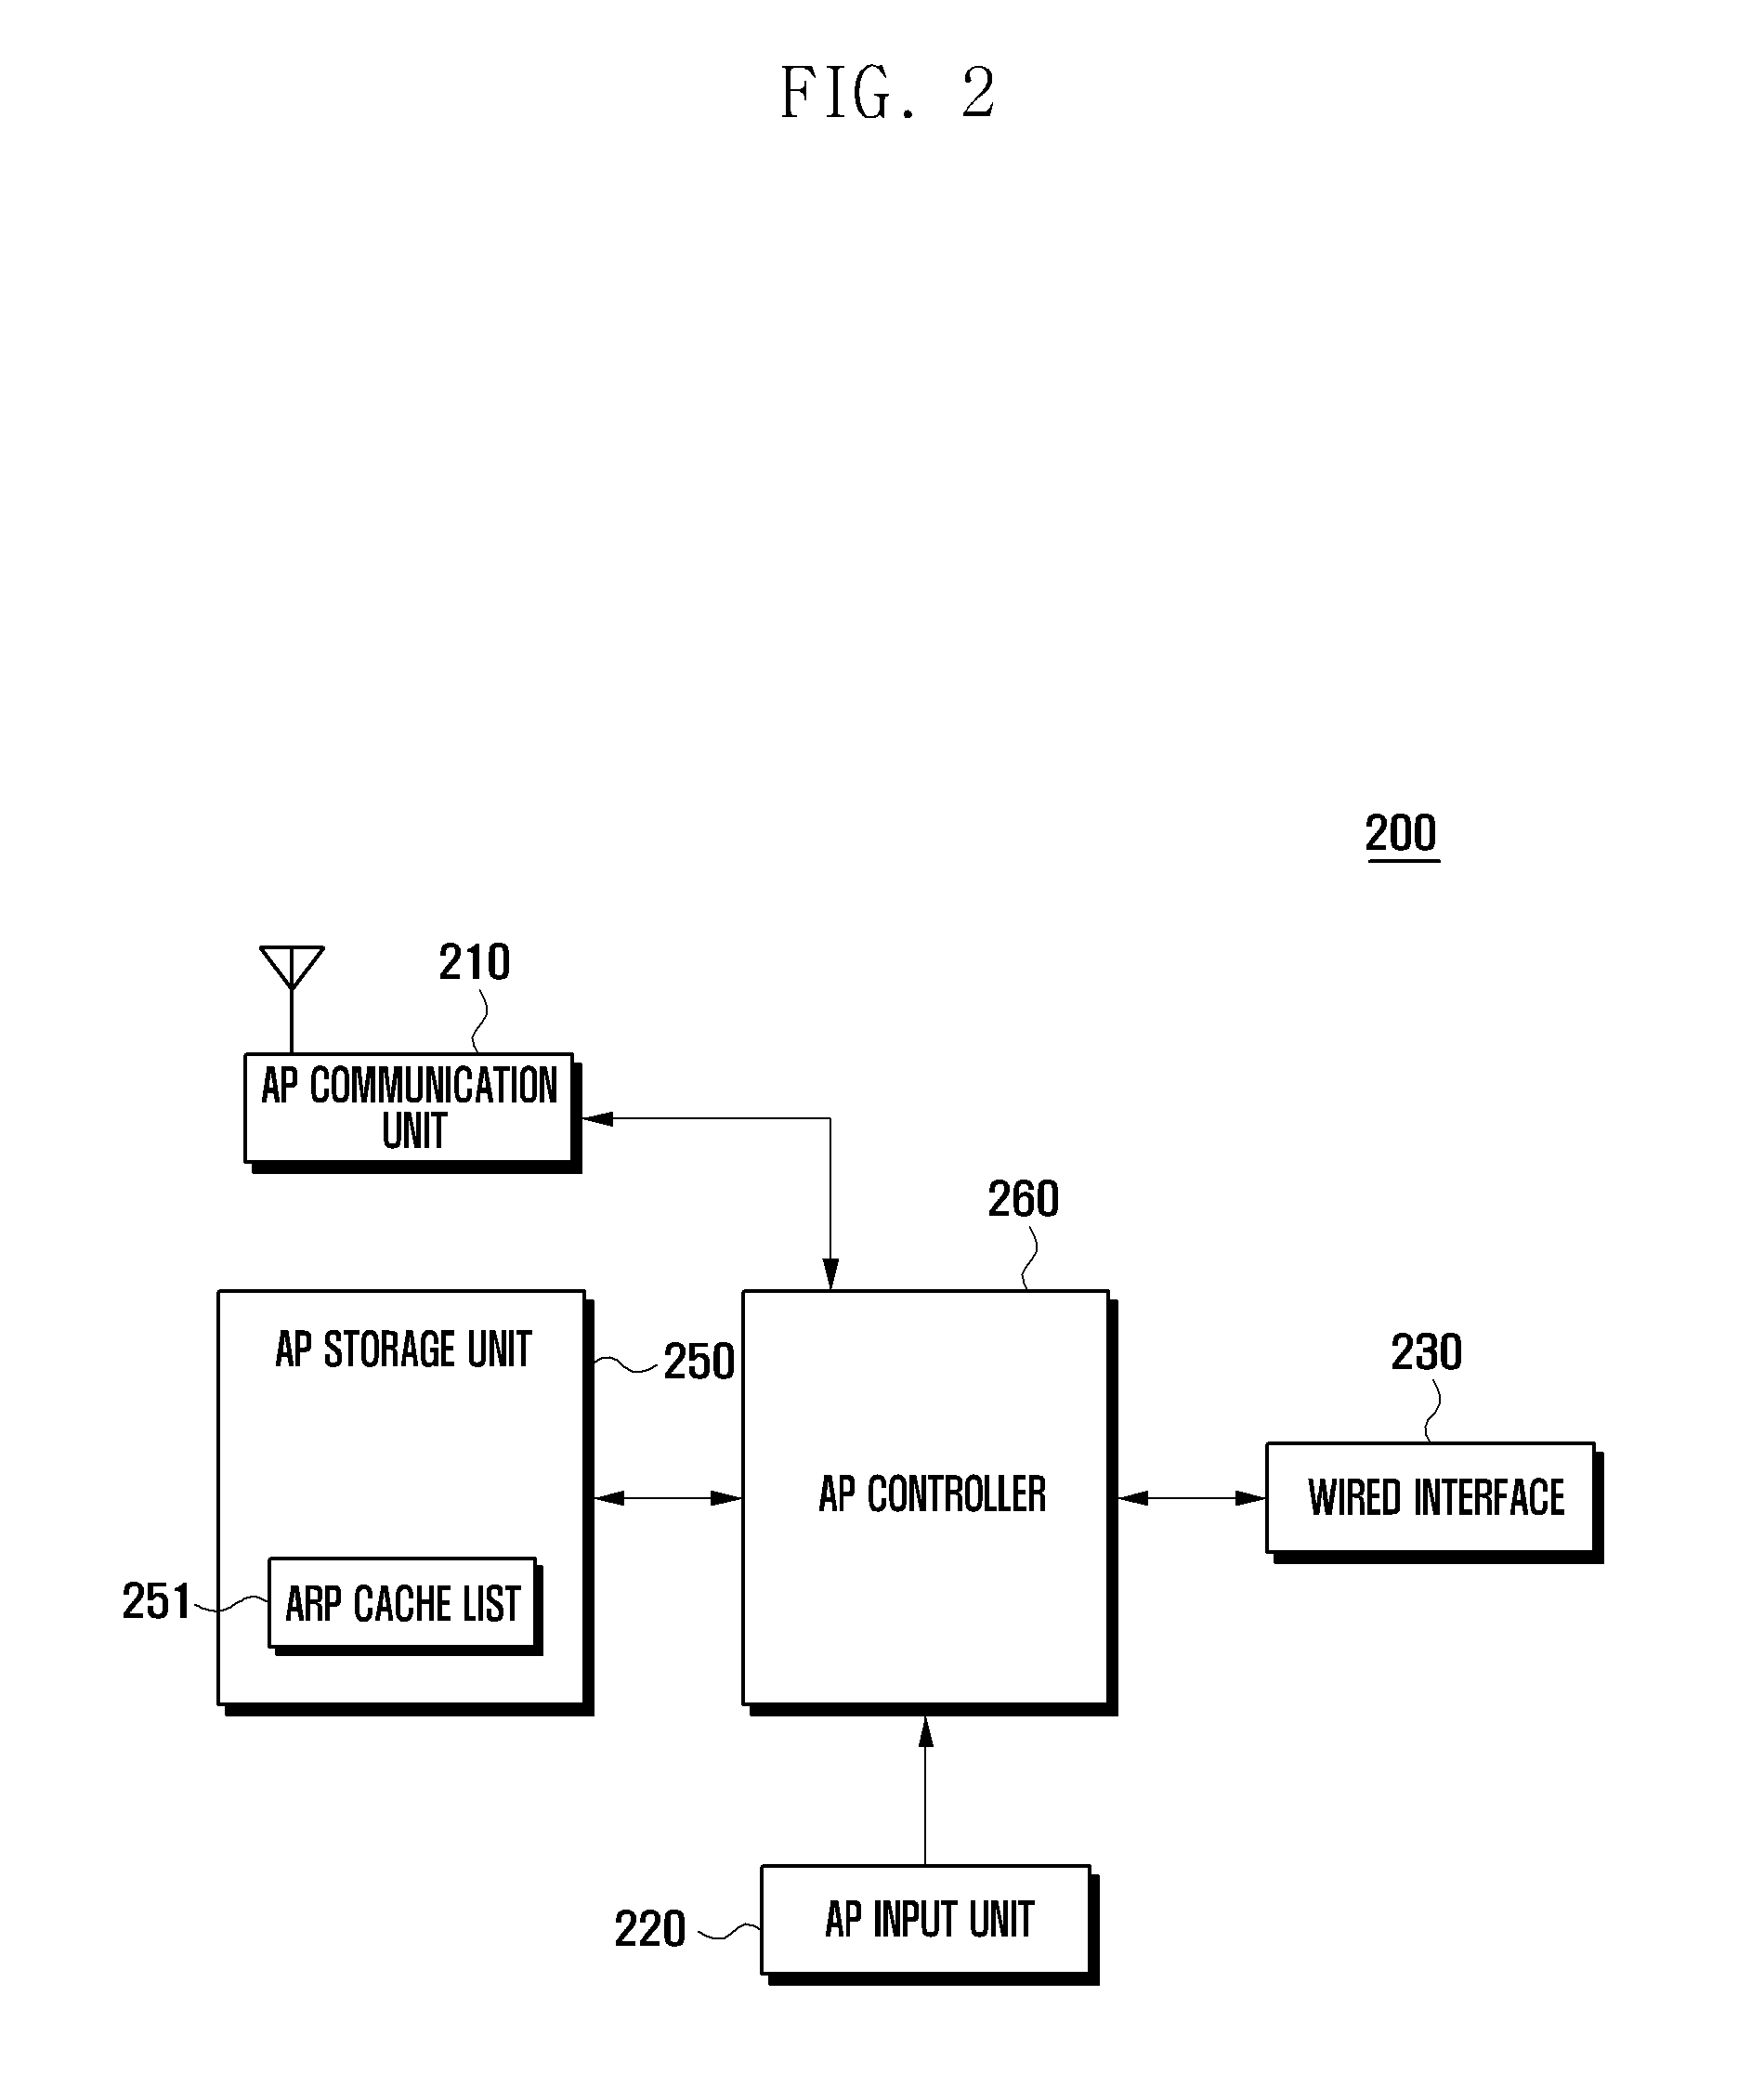 Security operation method and system for access point